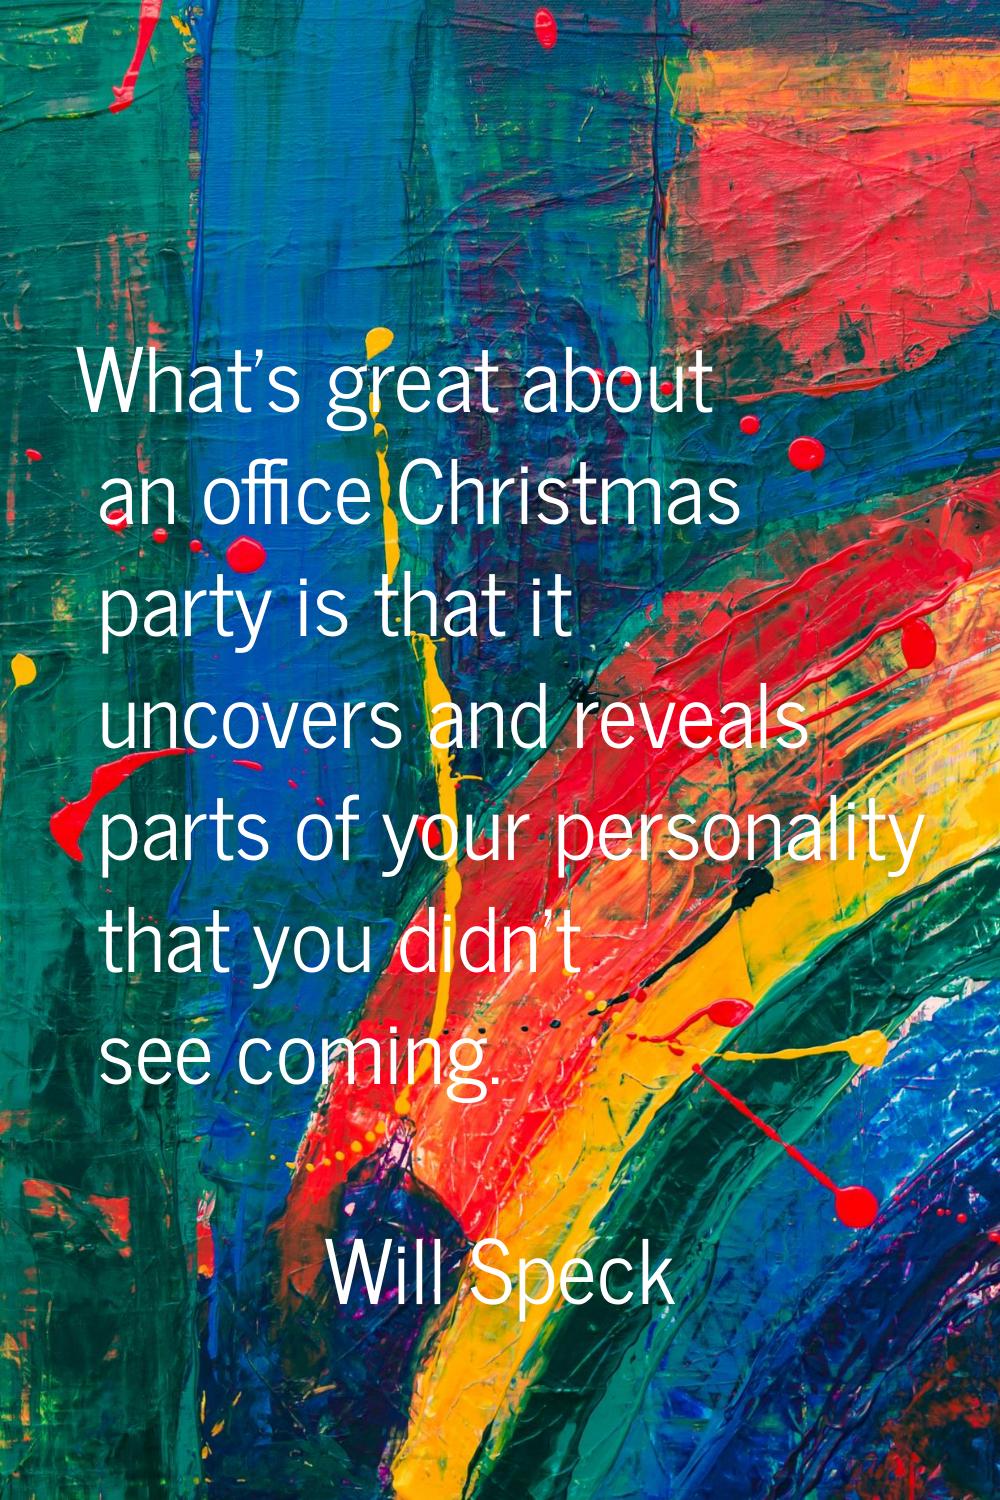 What's great about an office Christmas party is that it uncovers and reveals parts of your personal